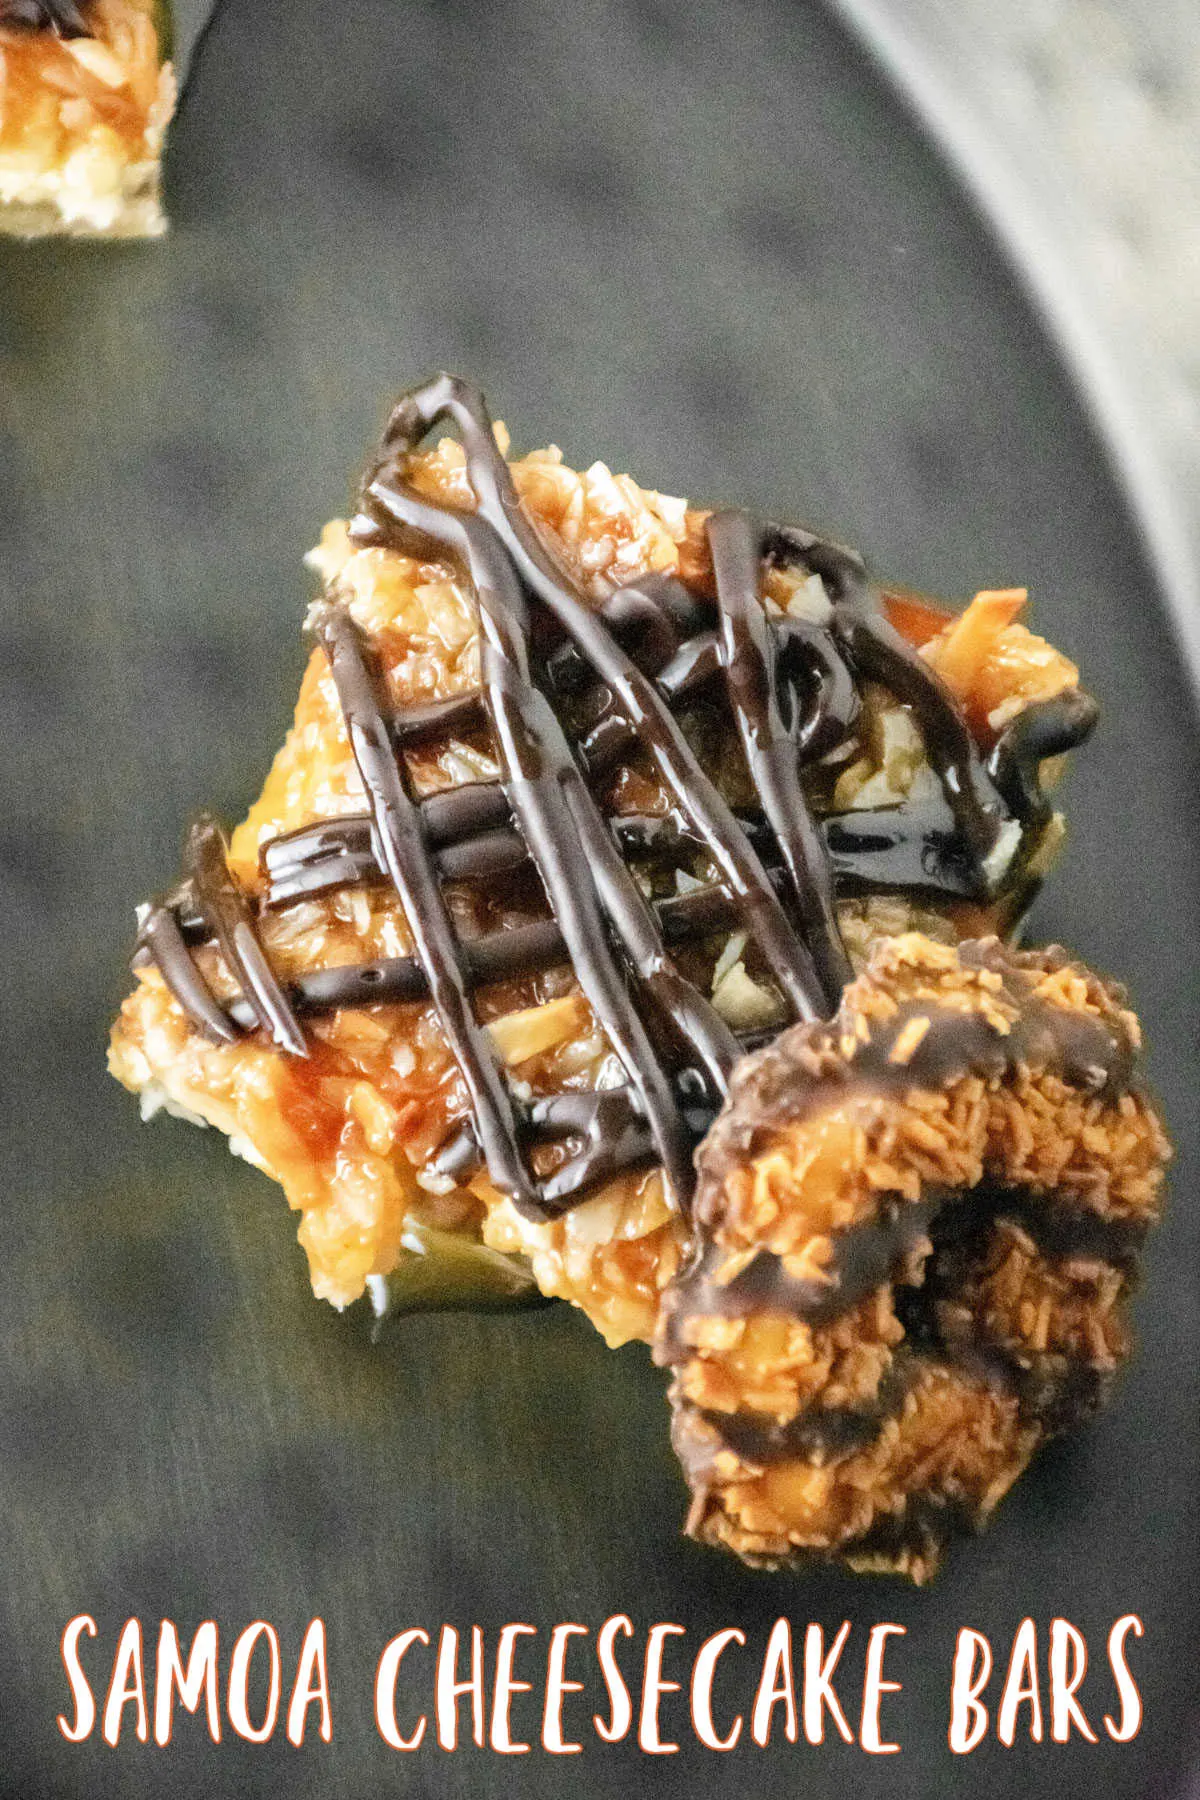 Samoa Cheesecake Bars cut and placed beside a girl scout Samoa Cookie